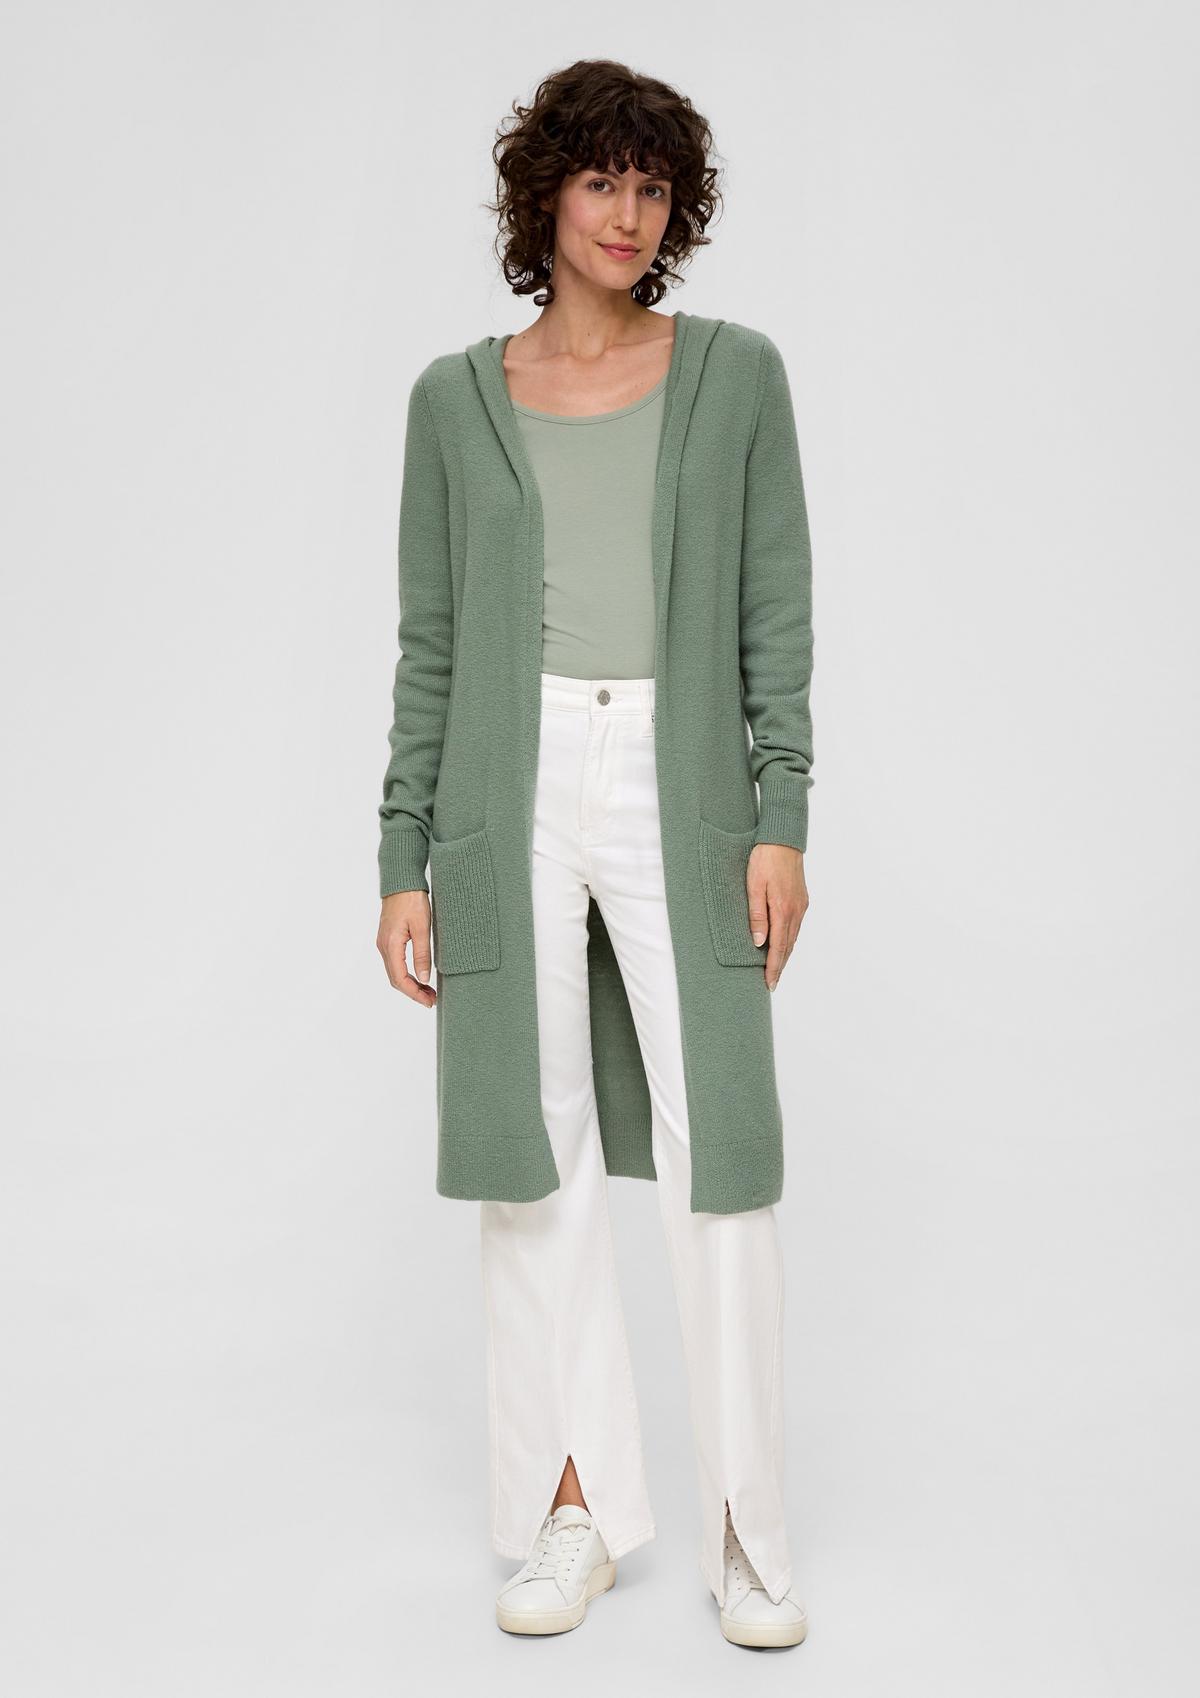 patch sage - green pockets with Cardigan